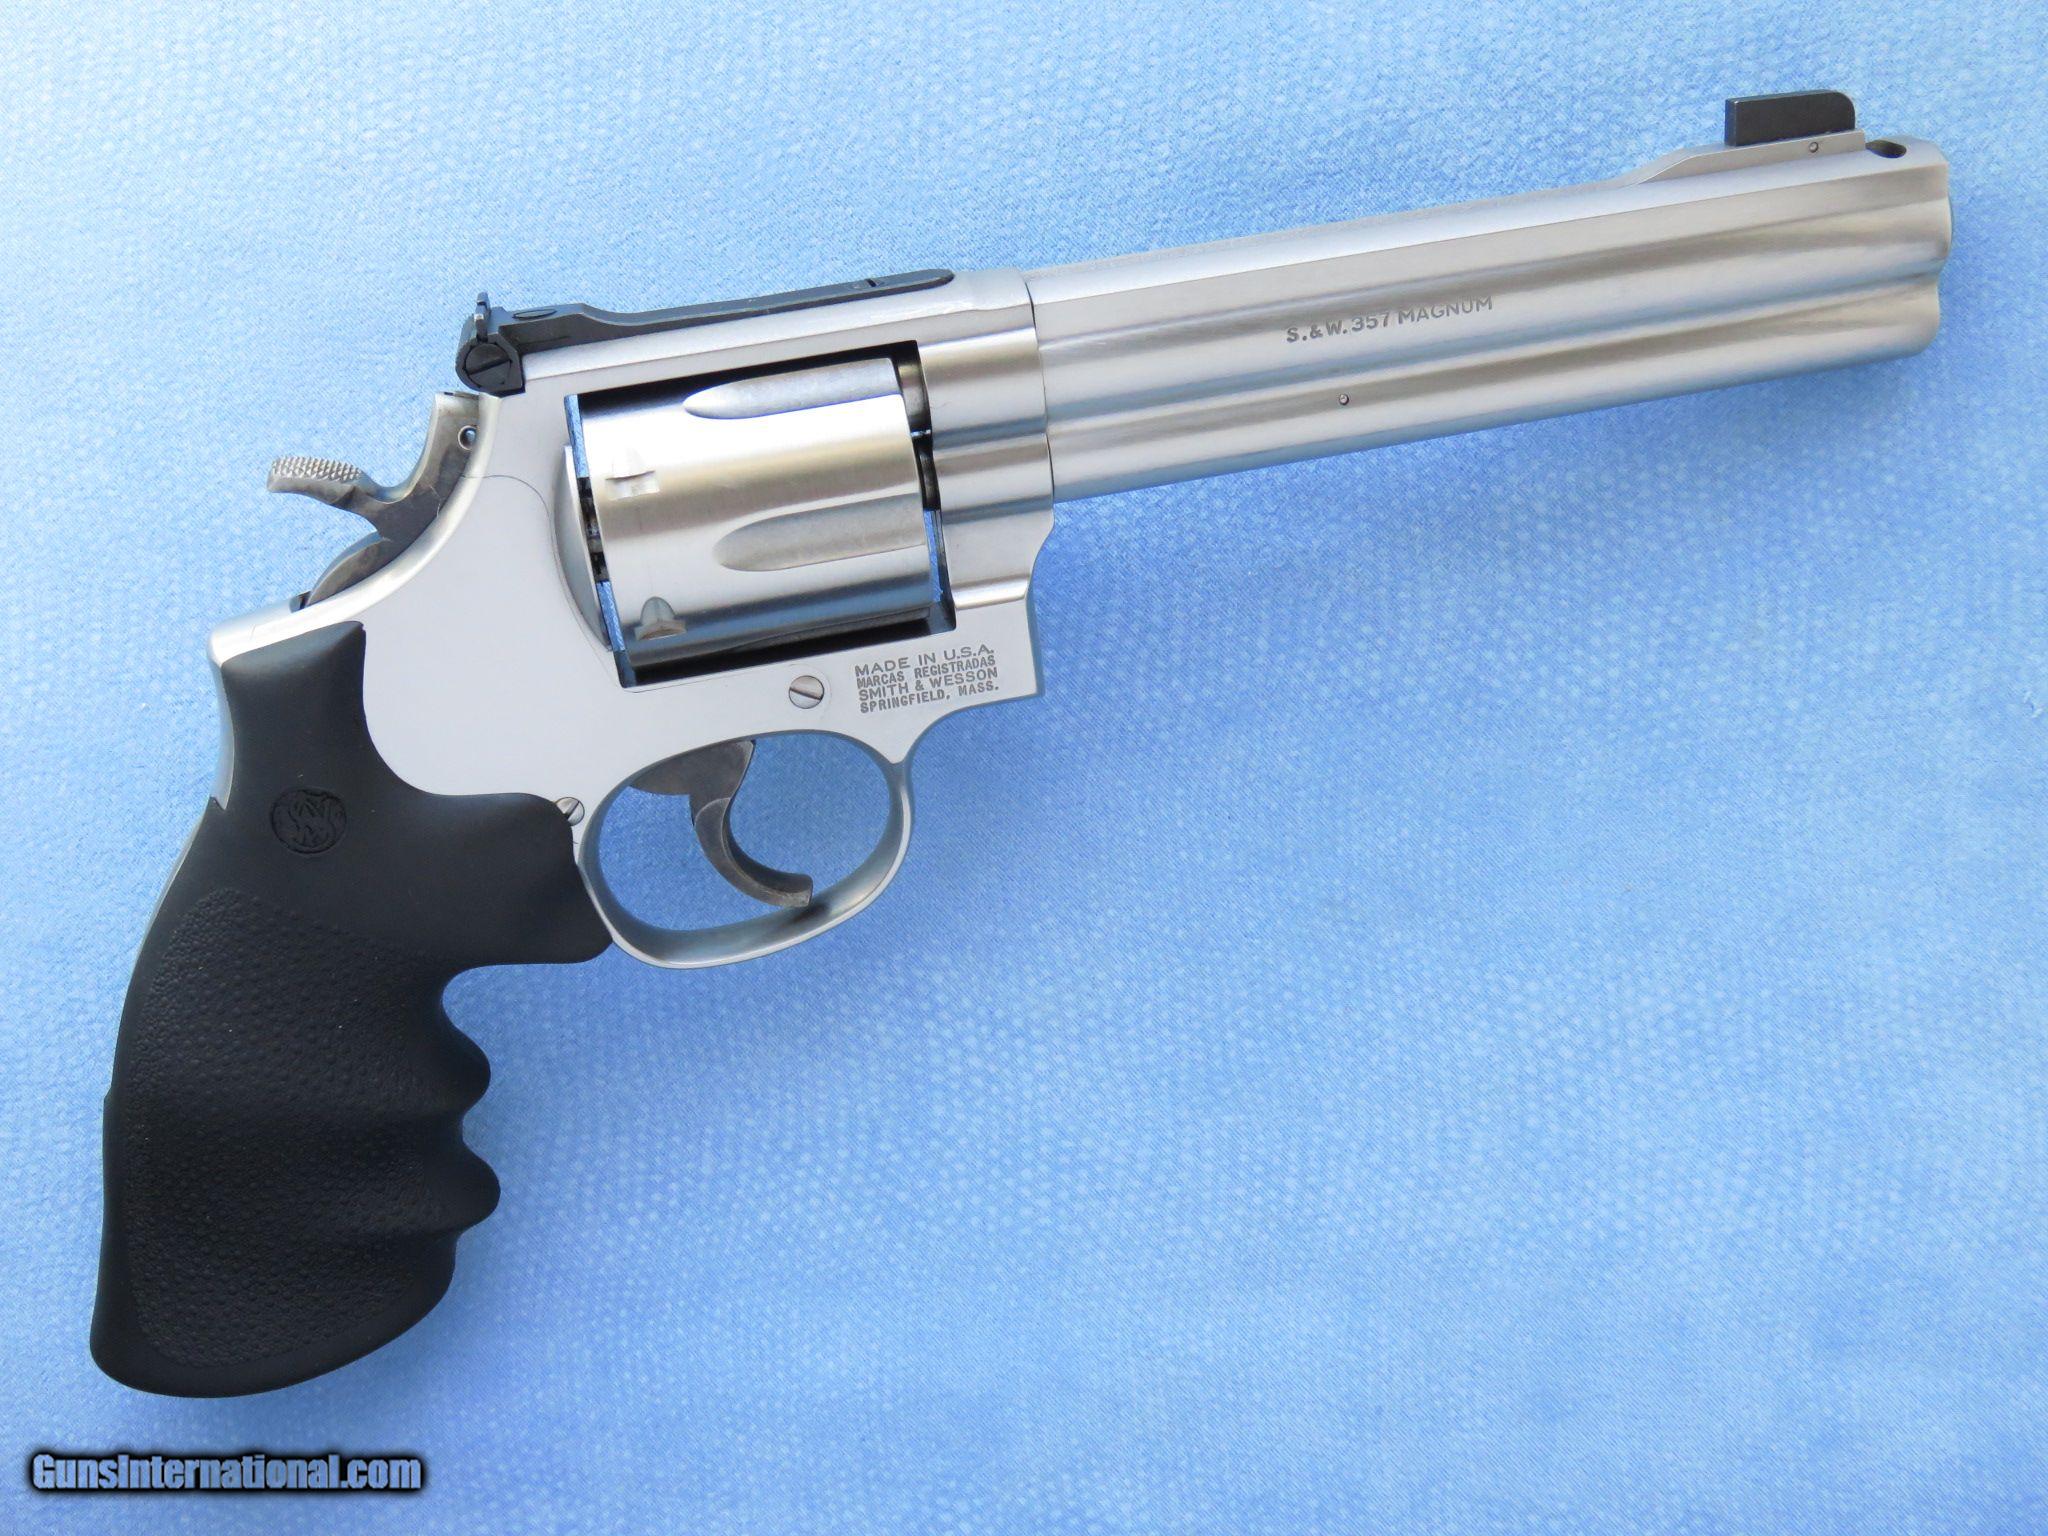 Smith And Wesson Model 686 Distinguished Combat Magnum Power Port Cal 357 Magnum